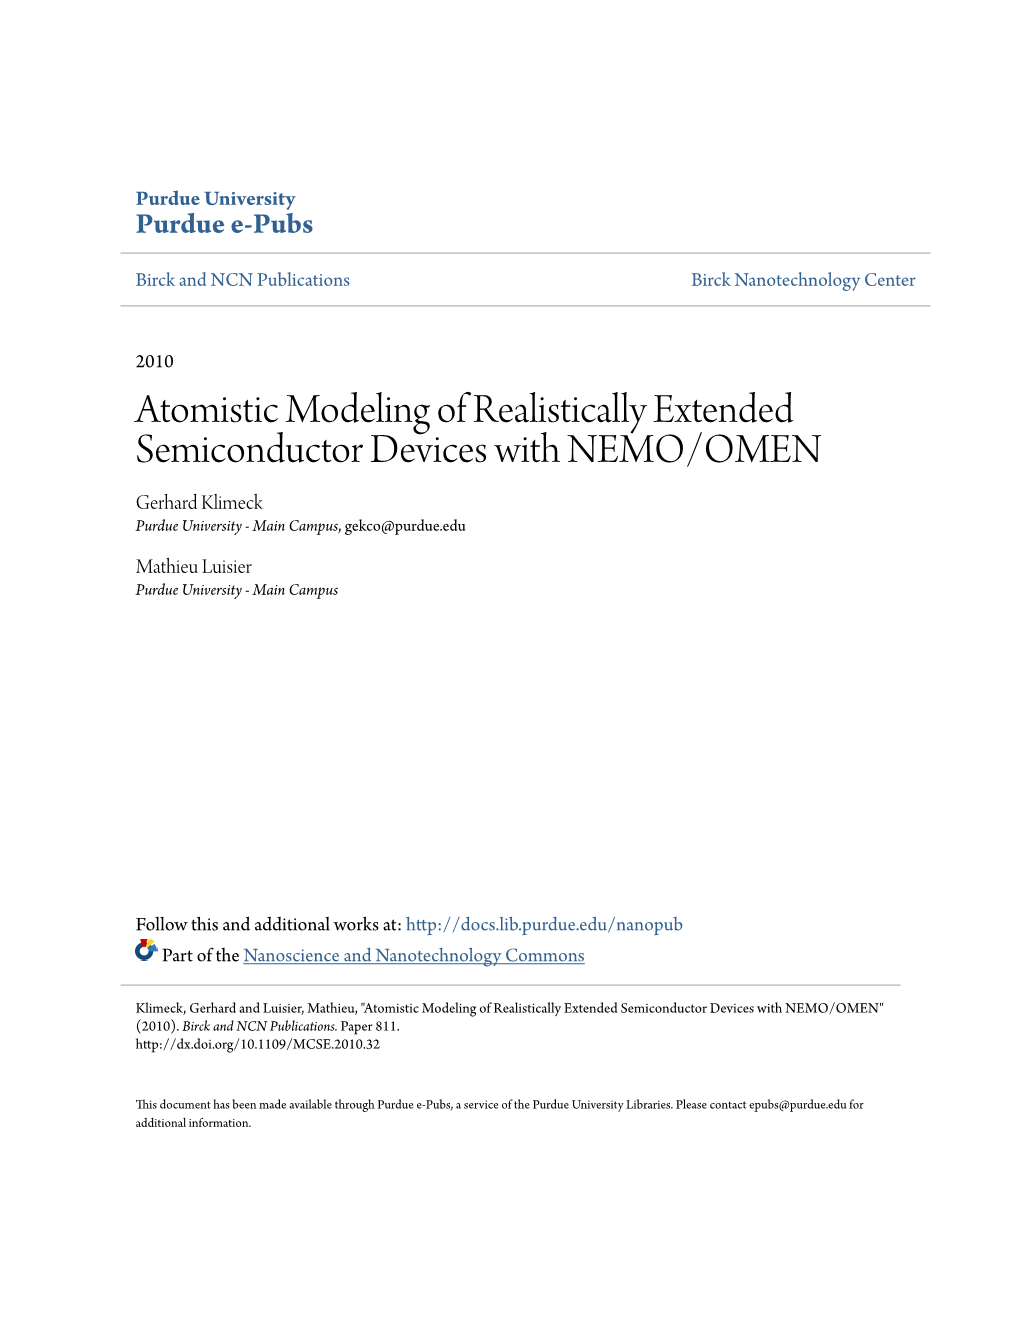 Atomistic Modeling of Realistically Extended Semiconductor Devices with NEMO/OMEN Gerhard Klimeck Purdue University - Main Campus, Gekco@Purdue.Edu